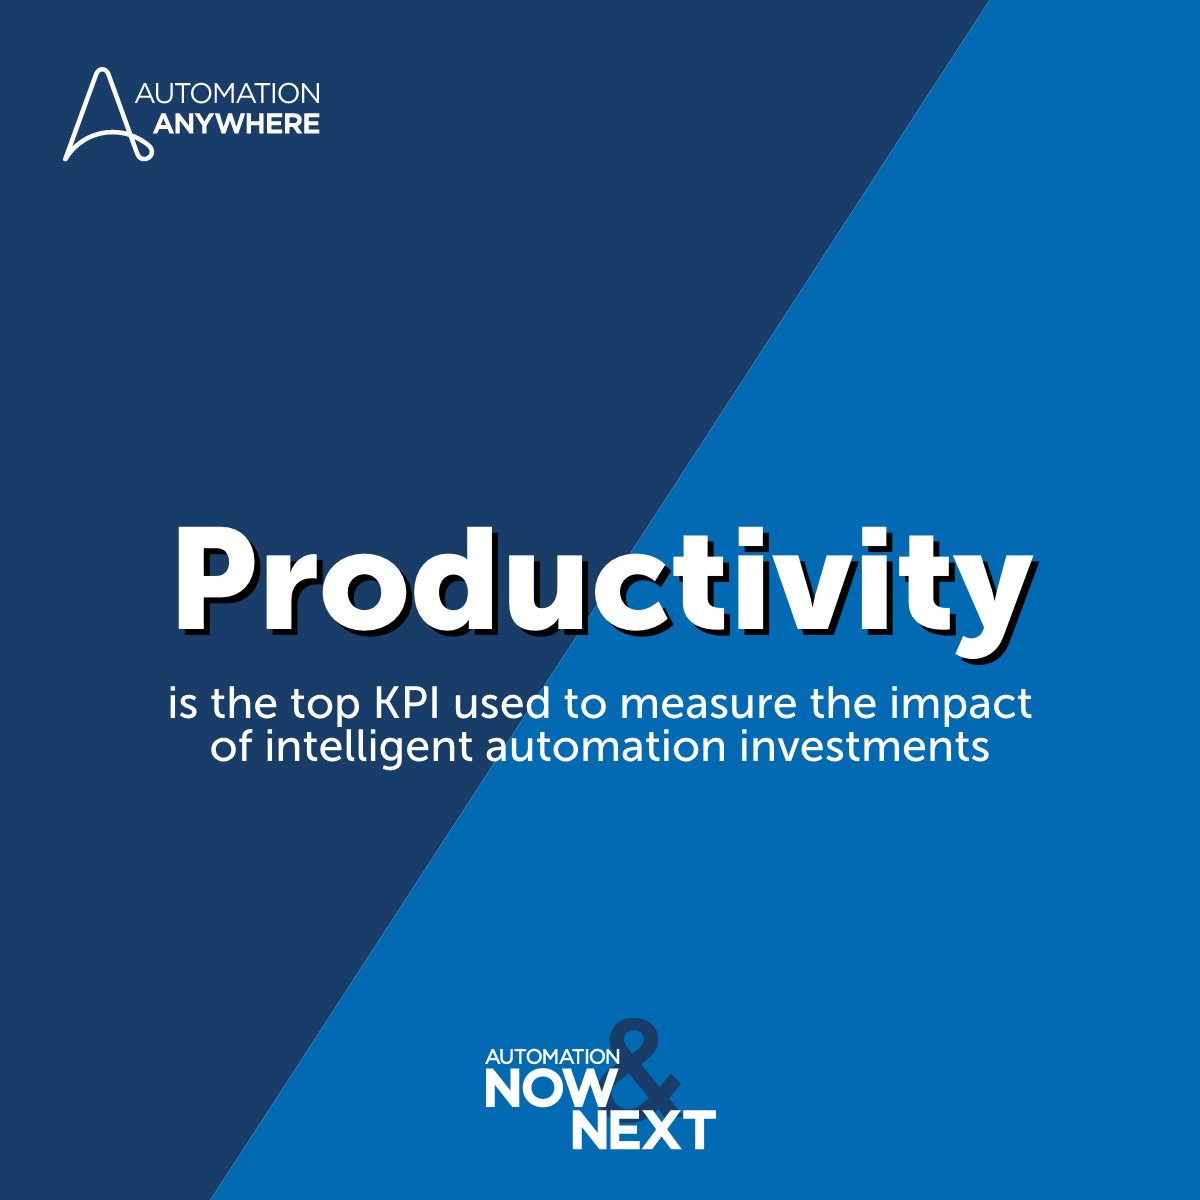 Even given current economic conditions, overall budgets for Intelligent Automation investments continue to increase, with the average hitting $5.6 million in 2023—a 17% increase over 2022. Increasing productivity is the primary driver for investment. - bit.ly/45Axn1F